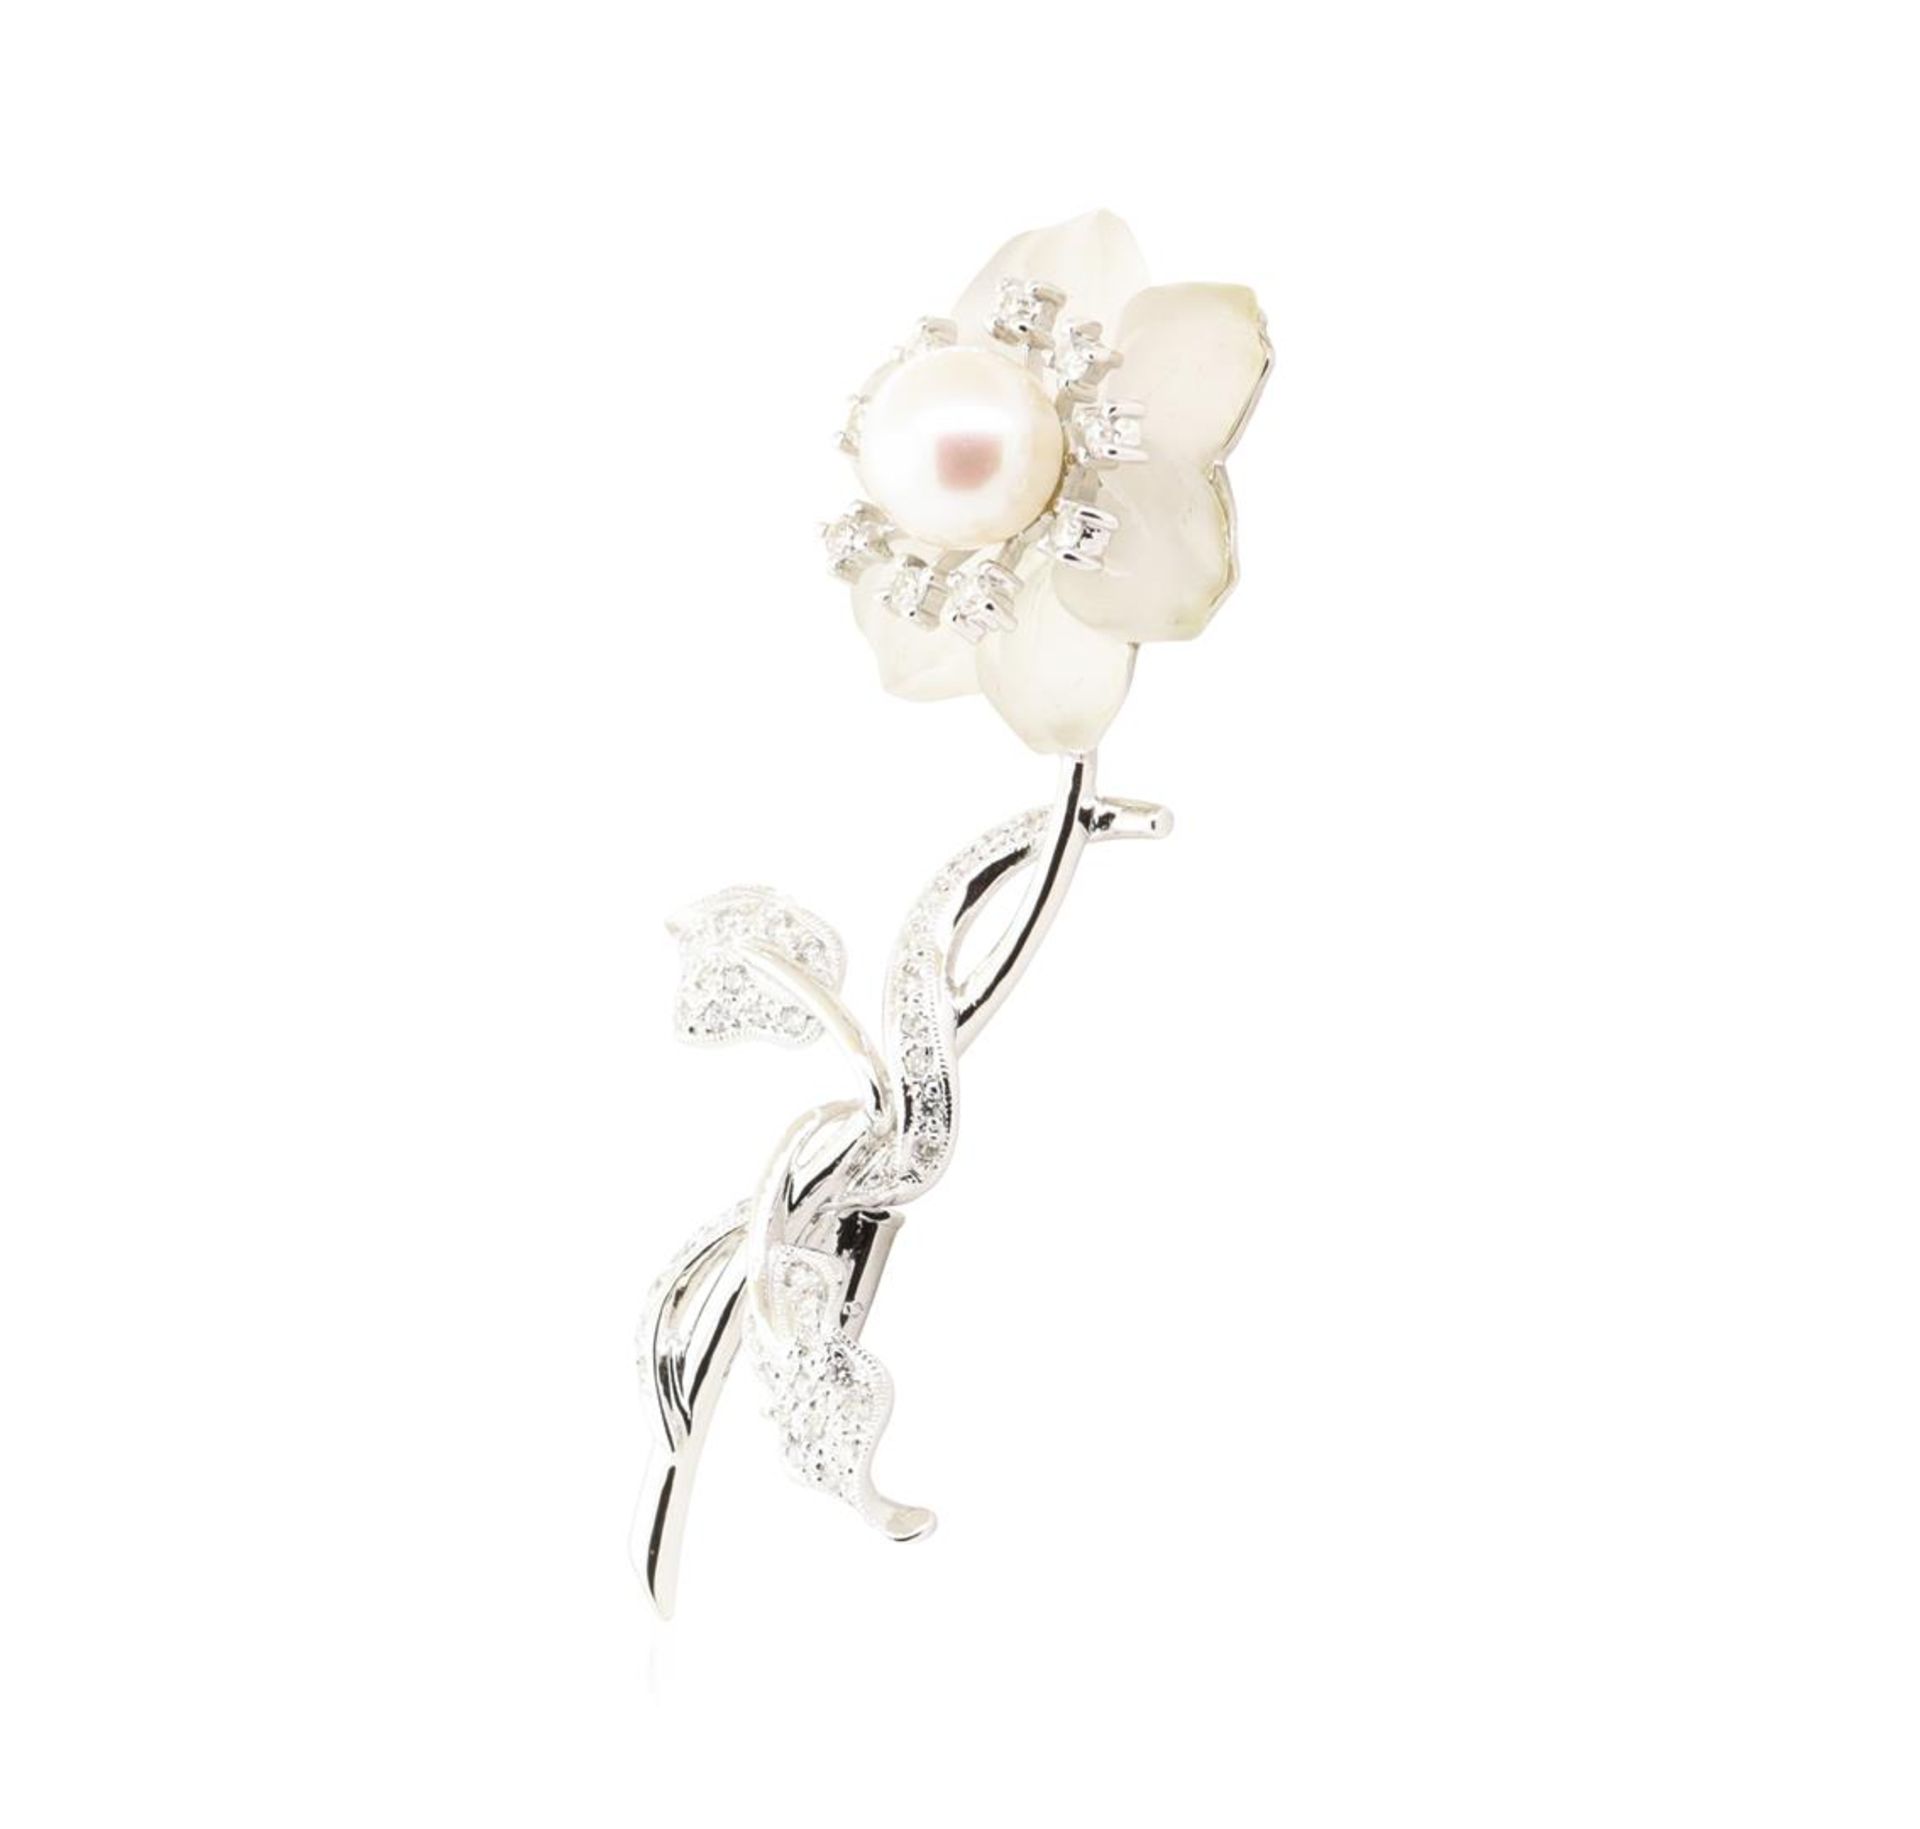 0.53 ctw Diamond and Pearl Flower Pin - 18KT White Gold - Image 2 of 3